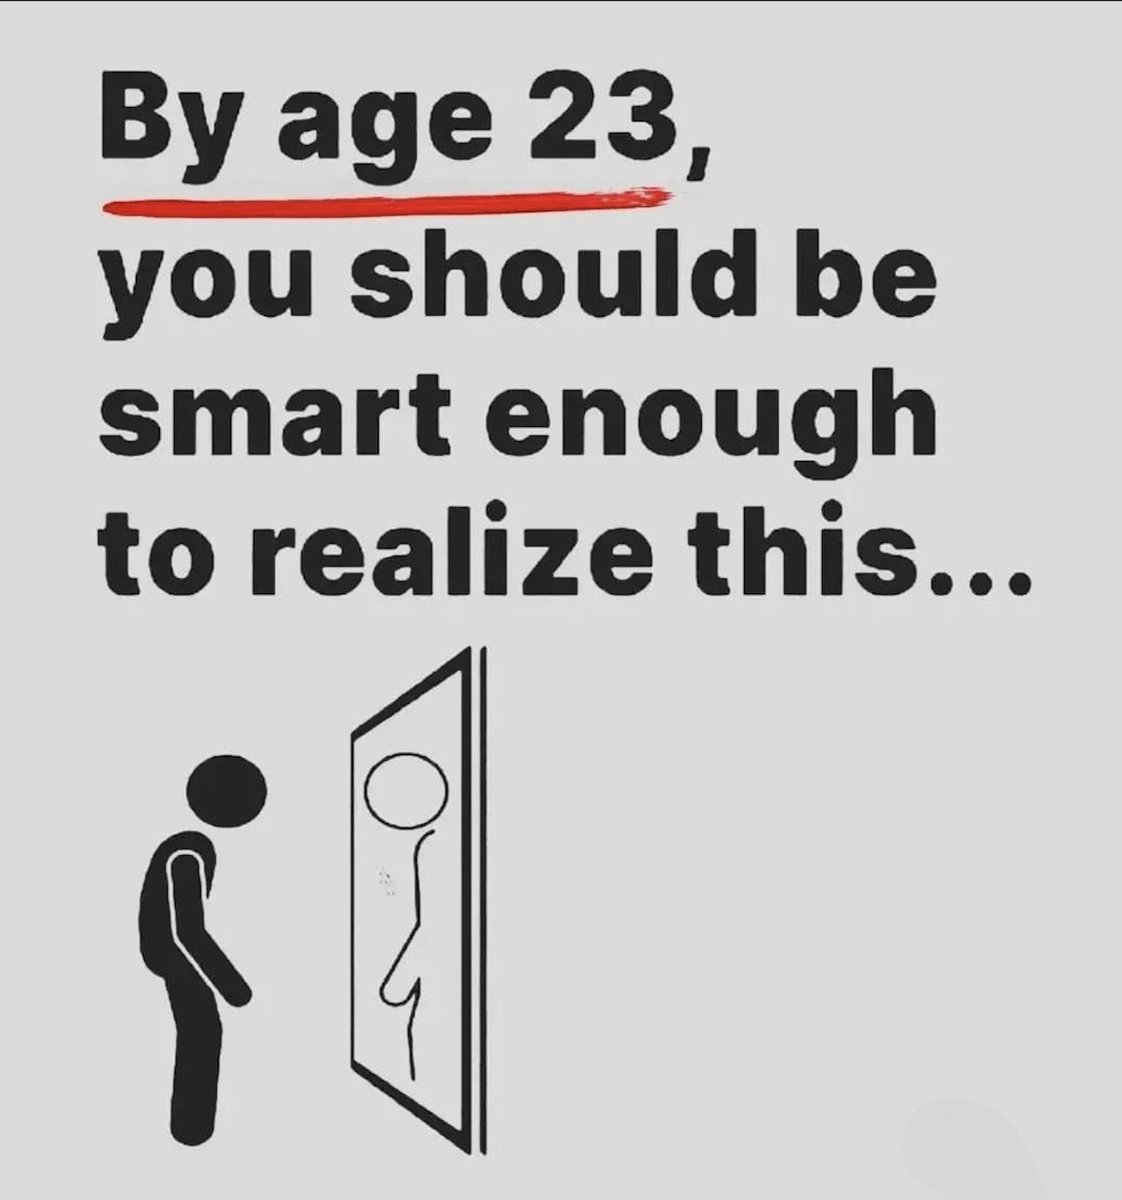 By age 23, you should be smart enough to realize this...